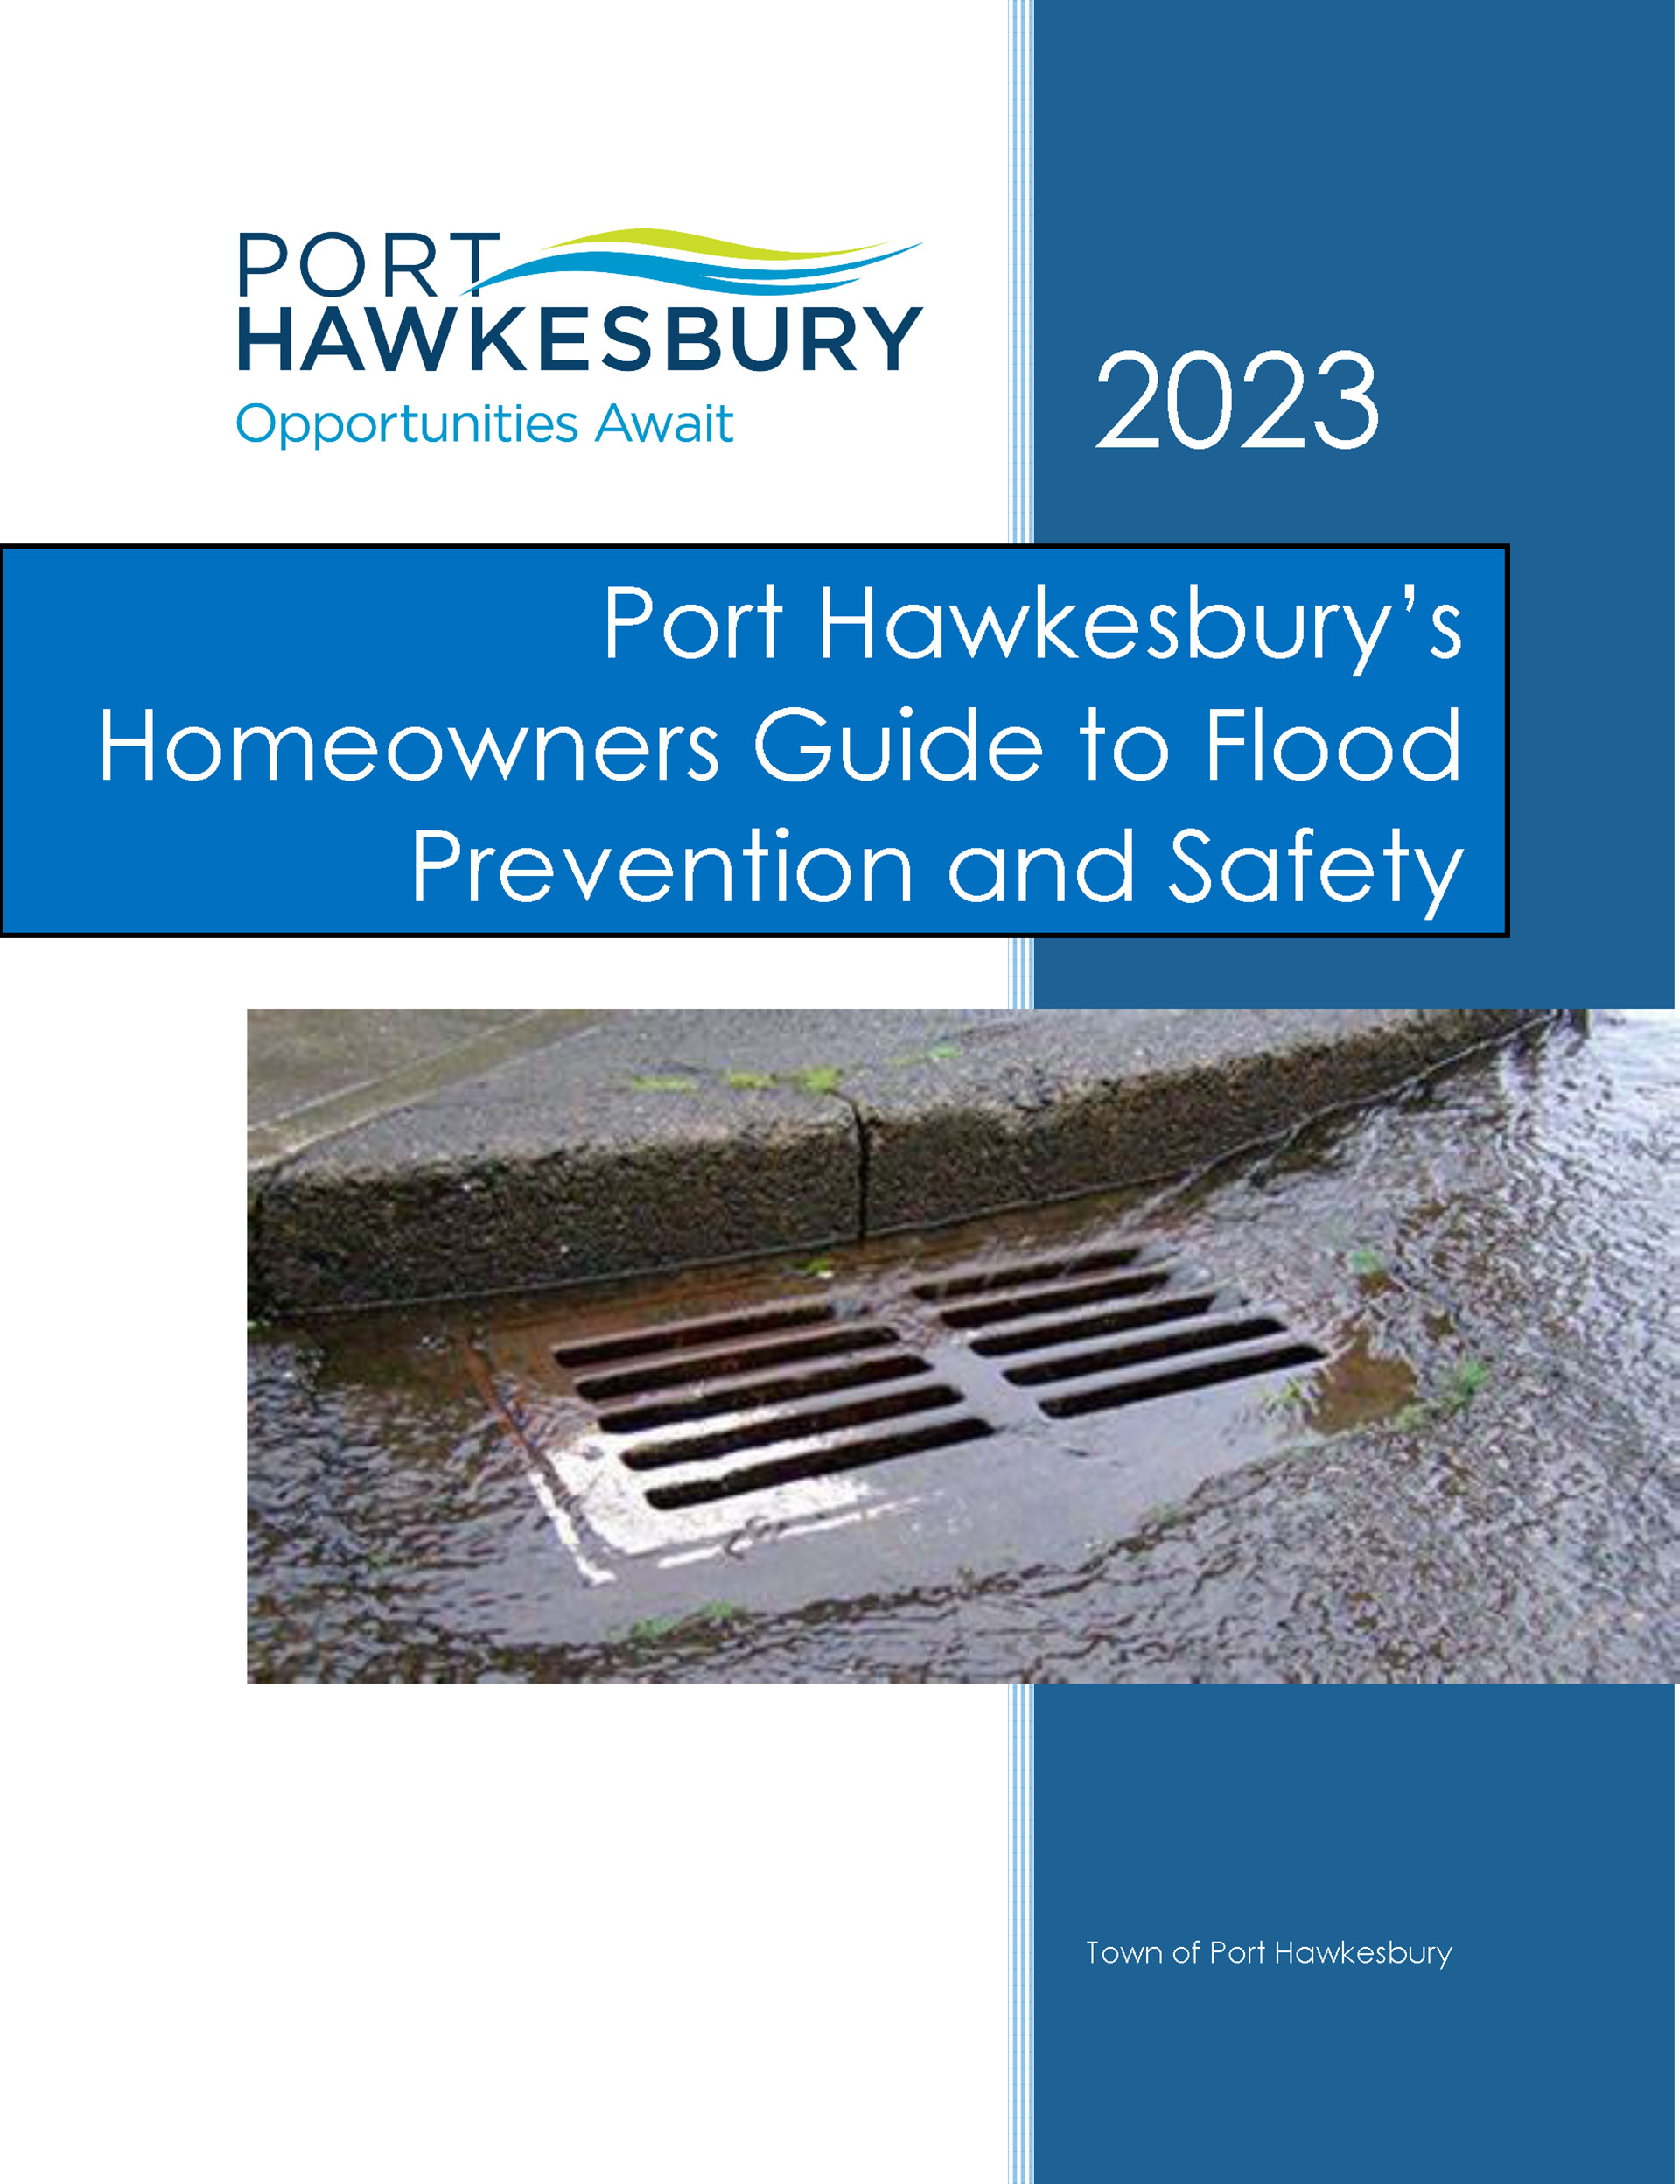 Homeowners Guide to Flood Prevention and Safety